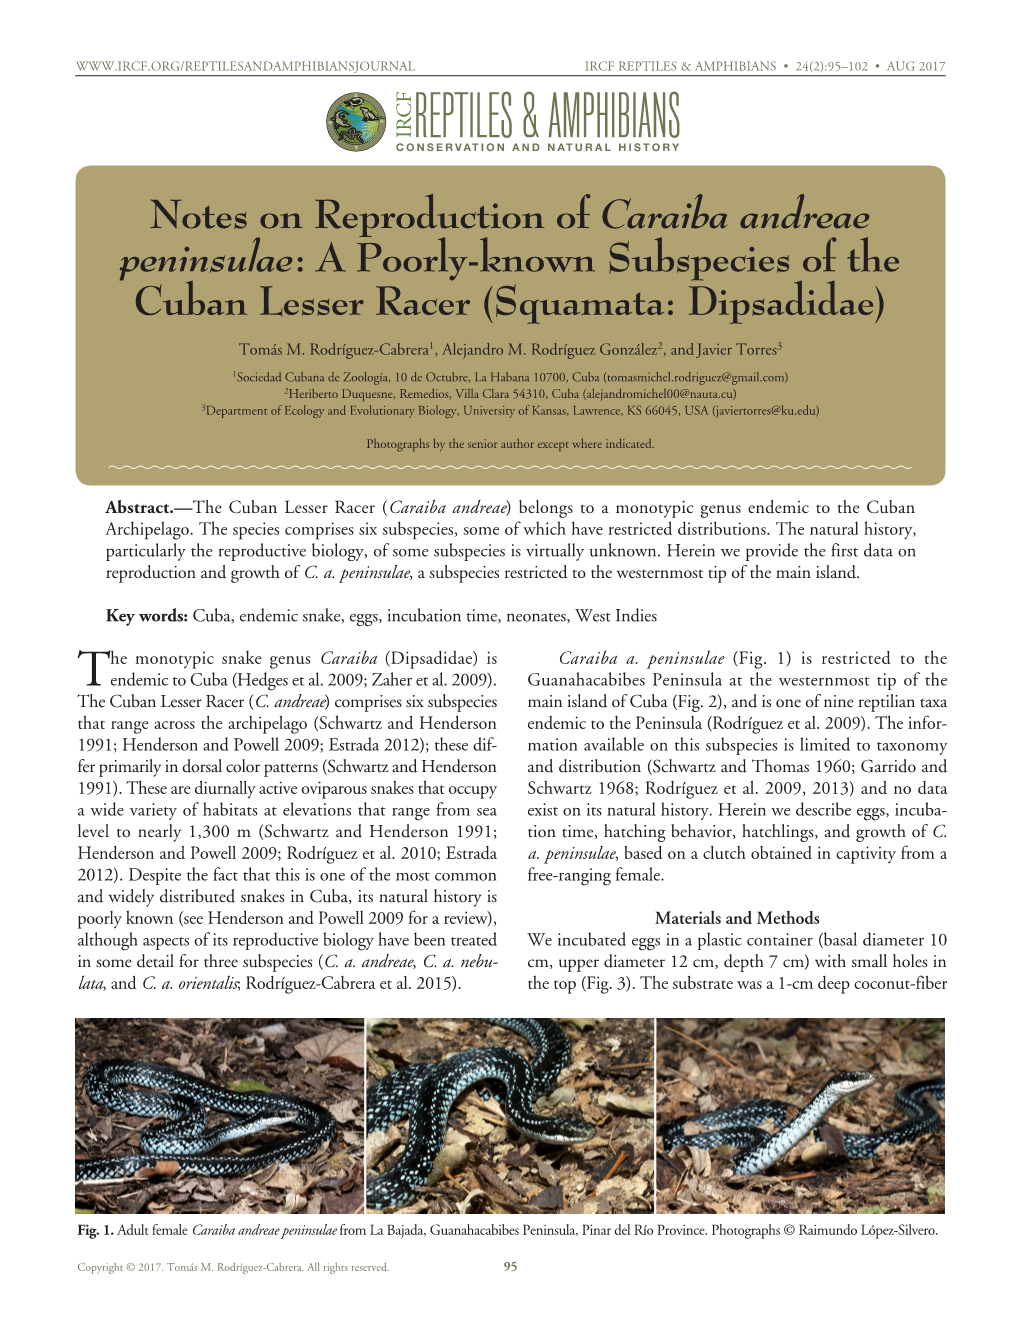 Notes on Reproduction of Caraiba Andreae Peninsulae